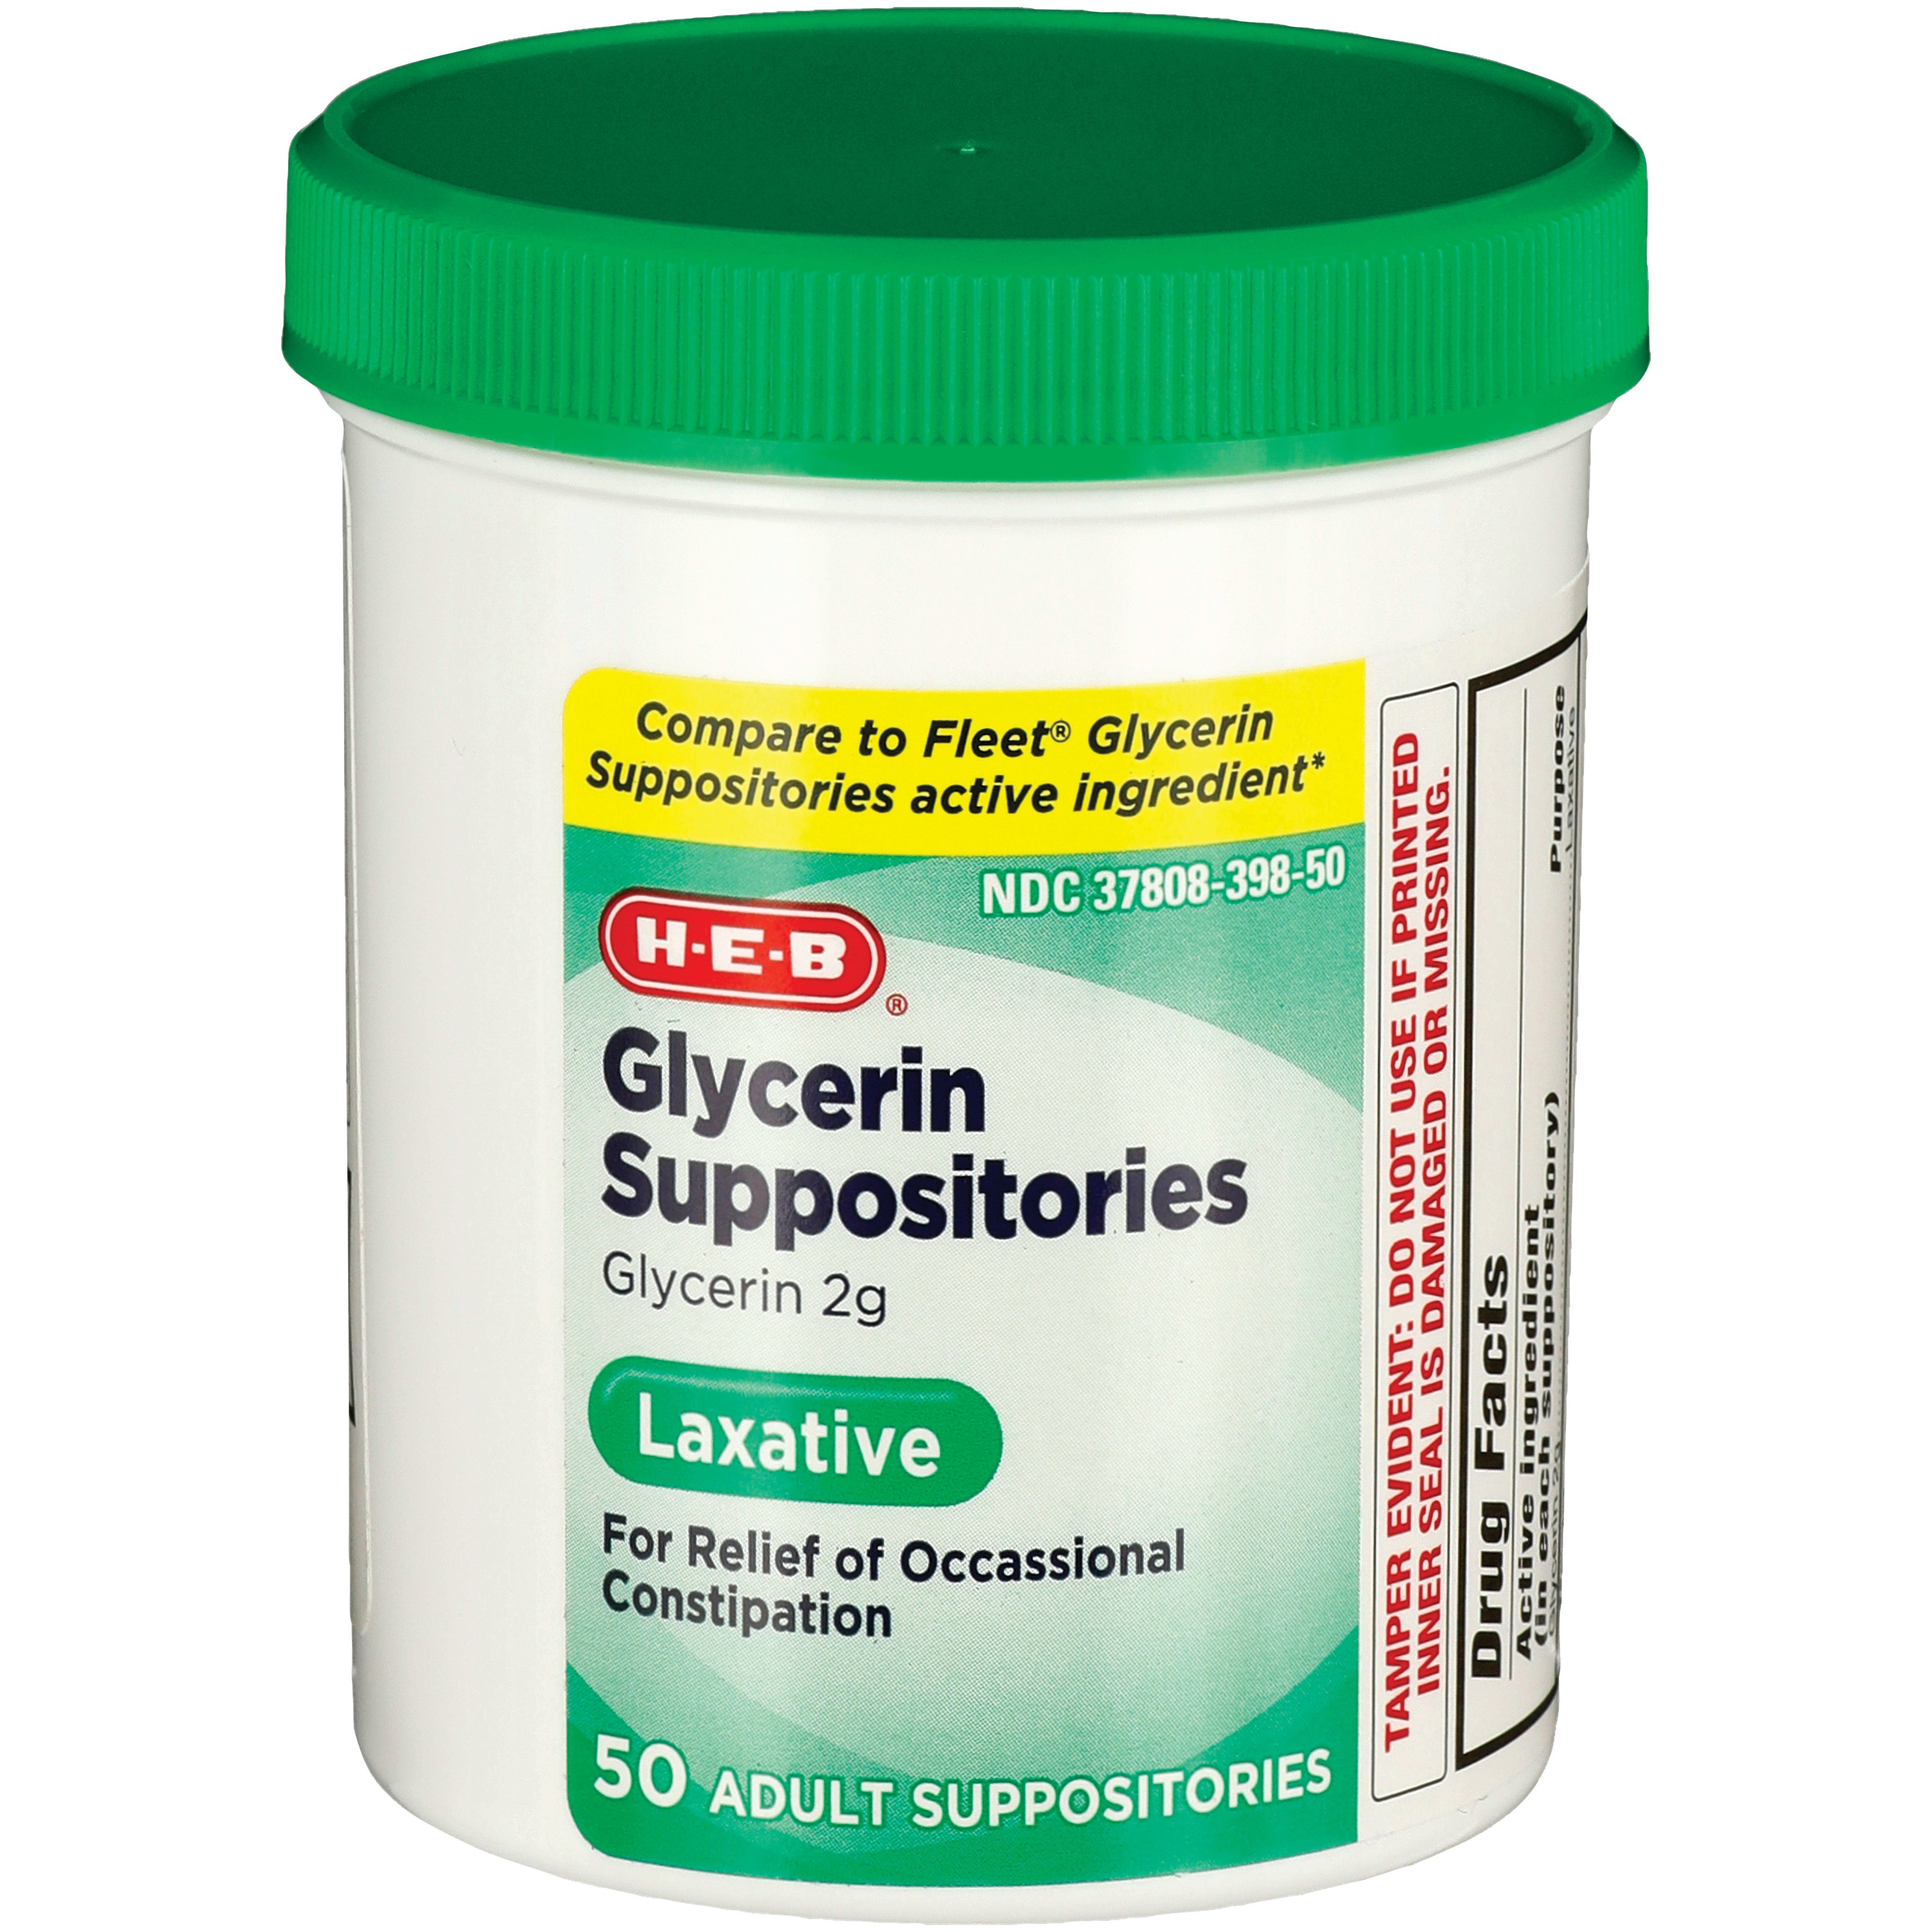 H-E-B Adult Glycerin Suppositories